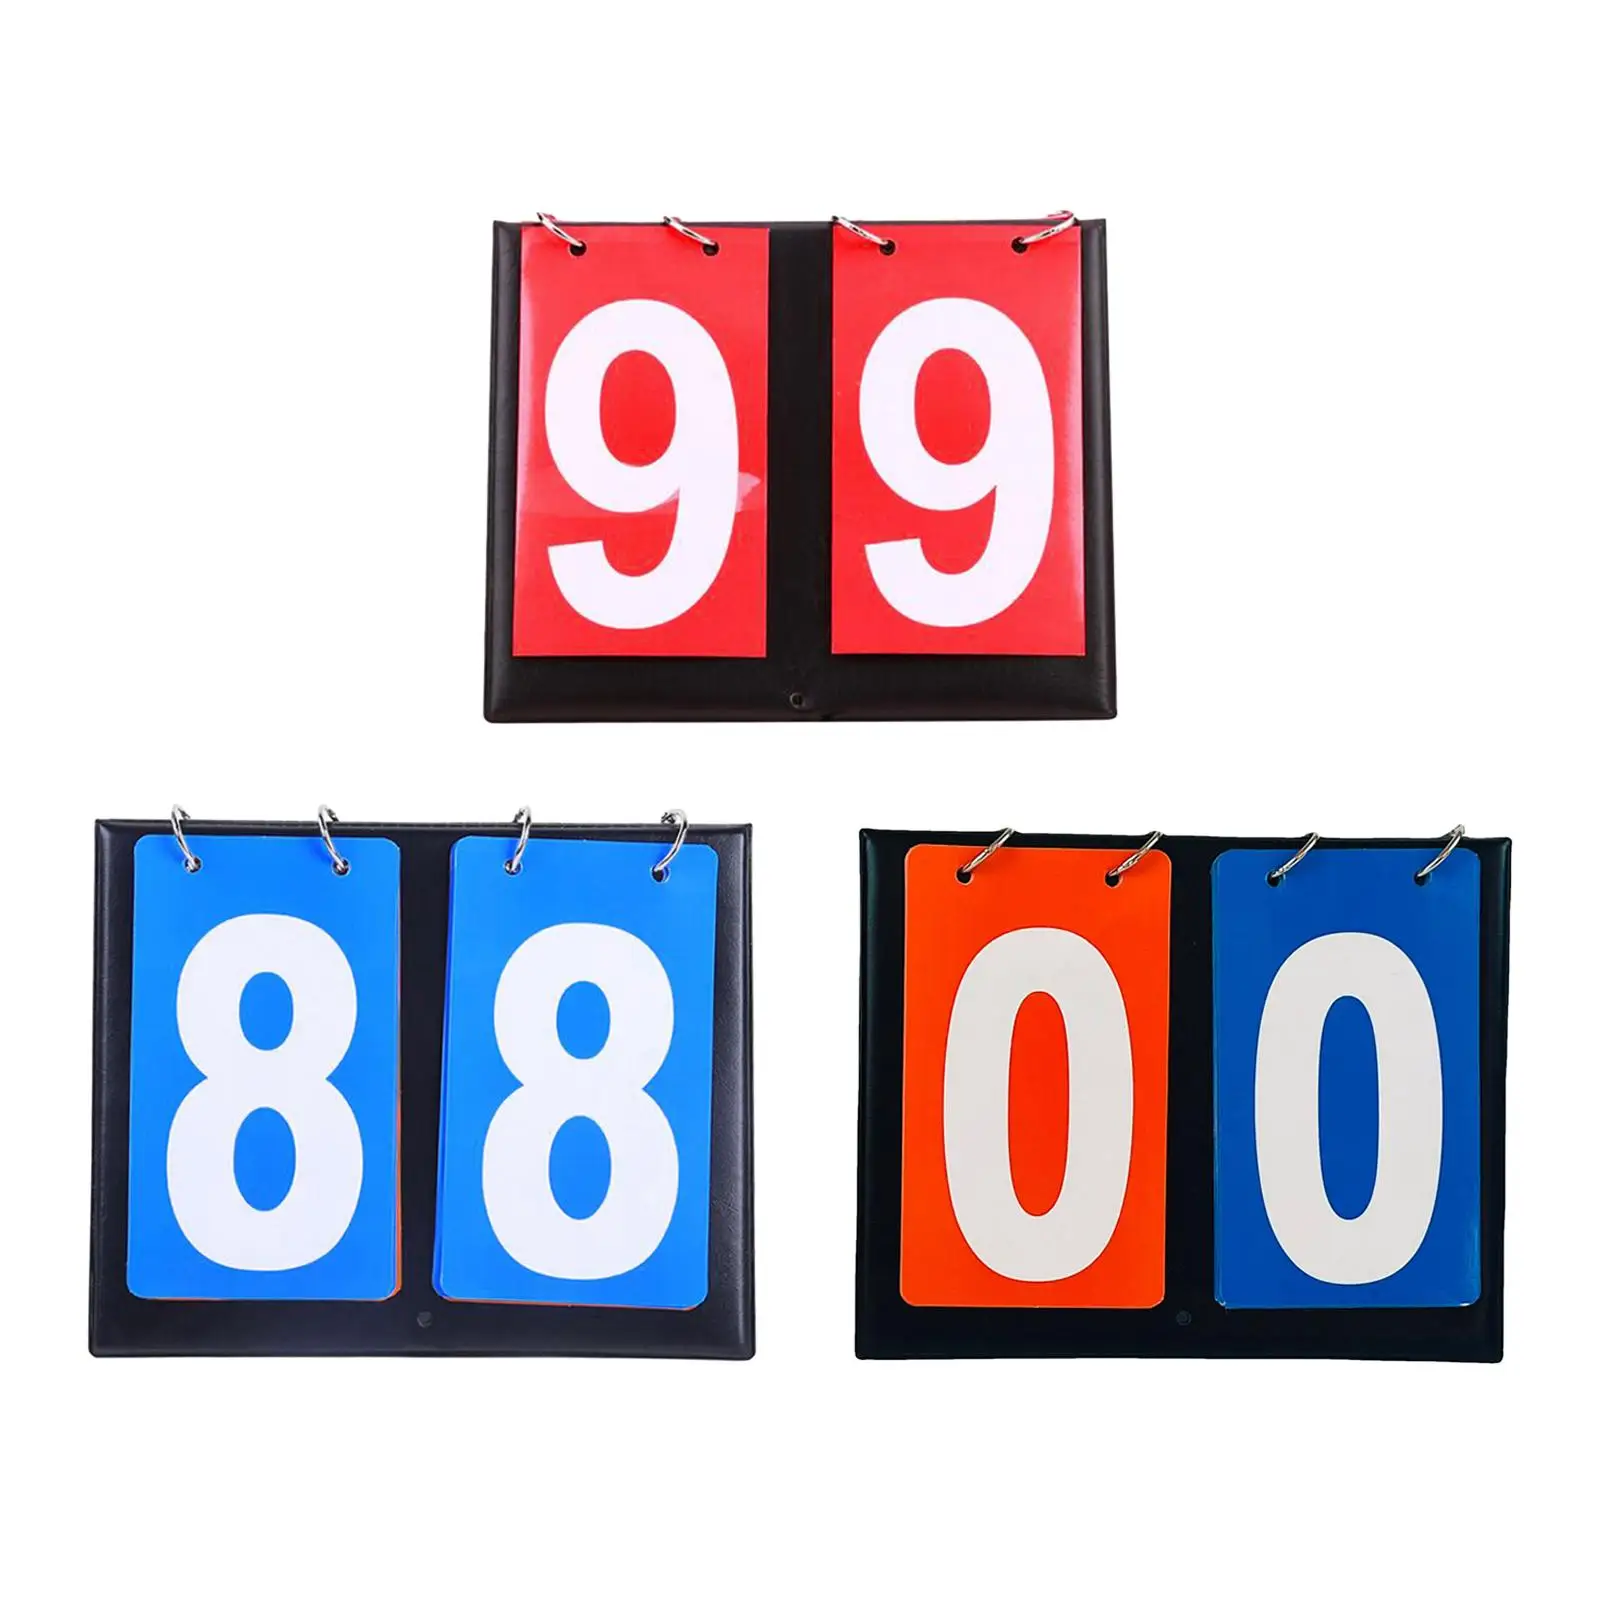 Multipurpose Table Scoreboard Flips up Detachable 2 digits Score Keeper for Basketball Indoor Sports Team Games Competition Ball